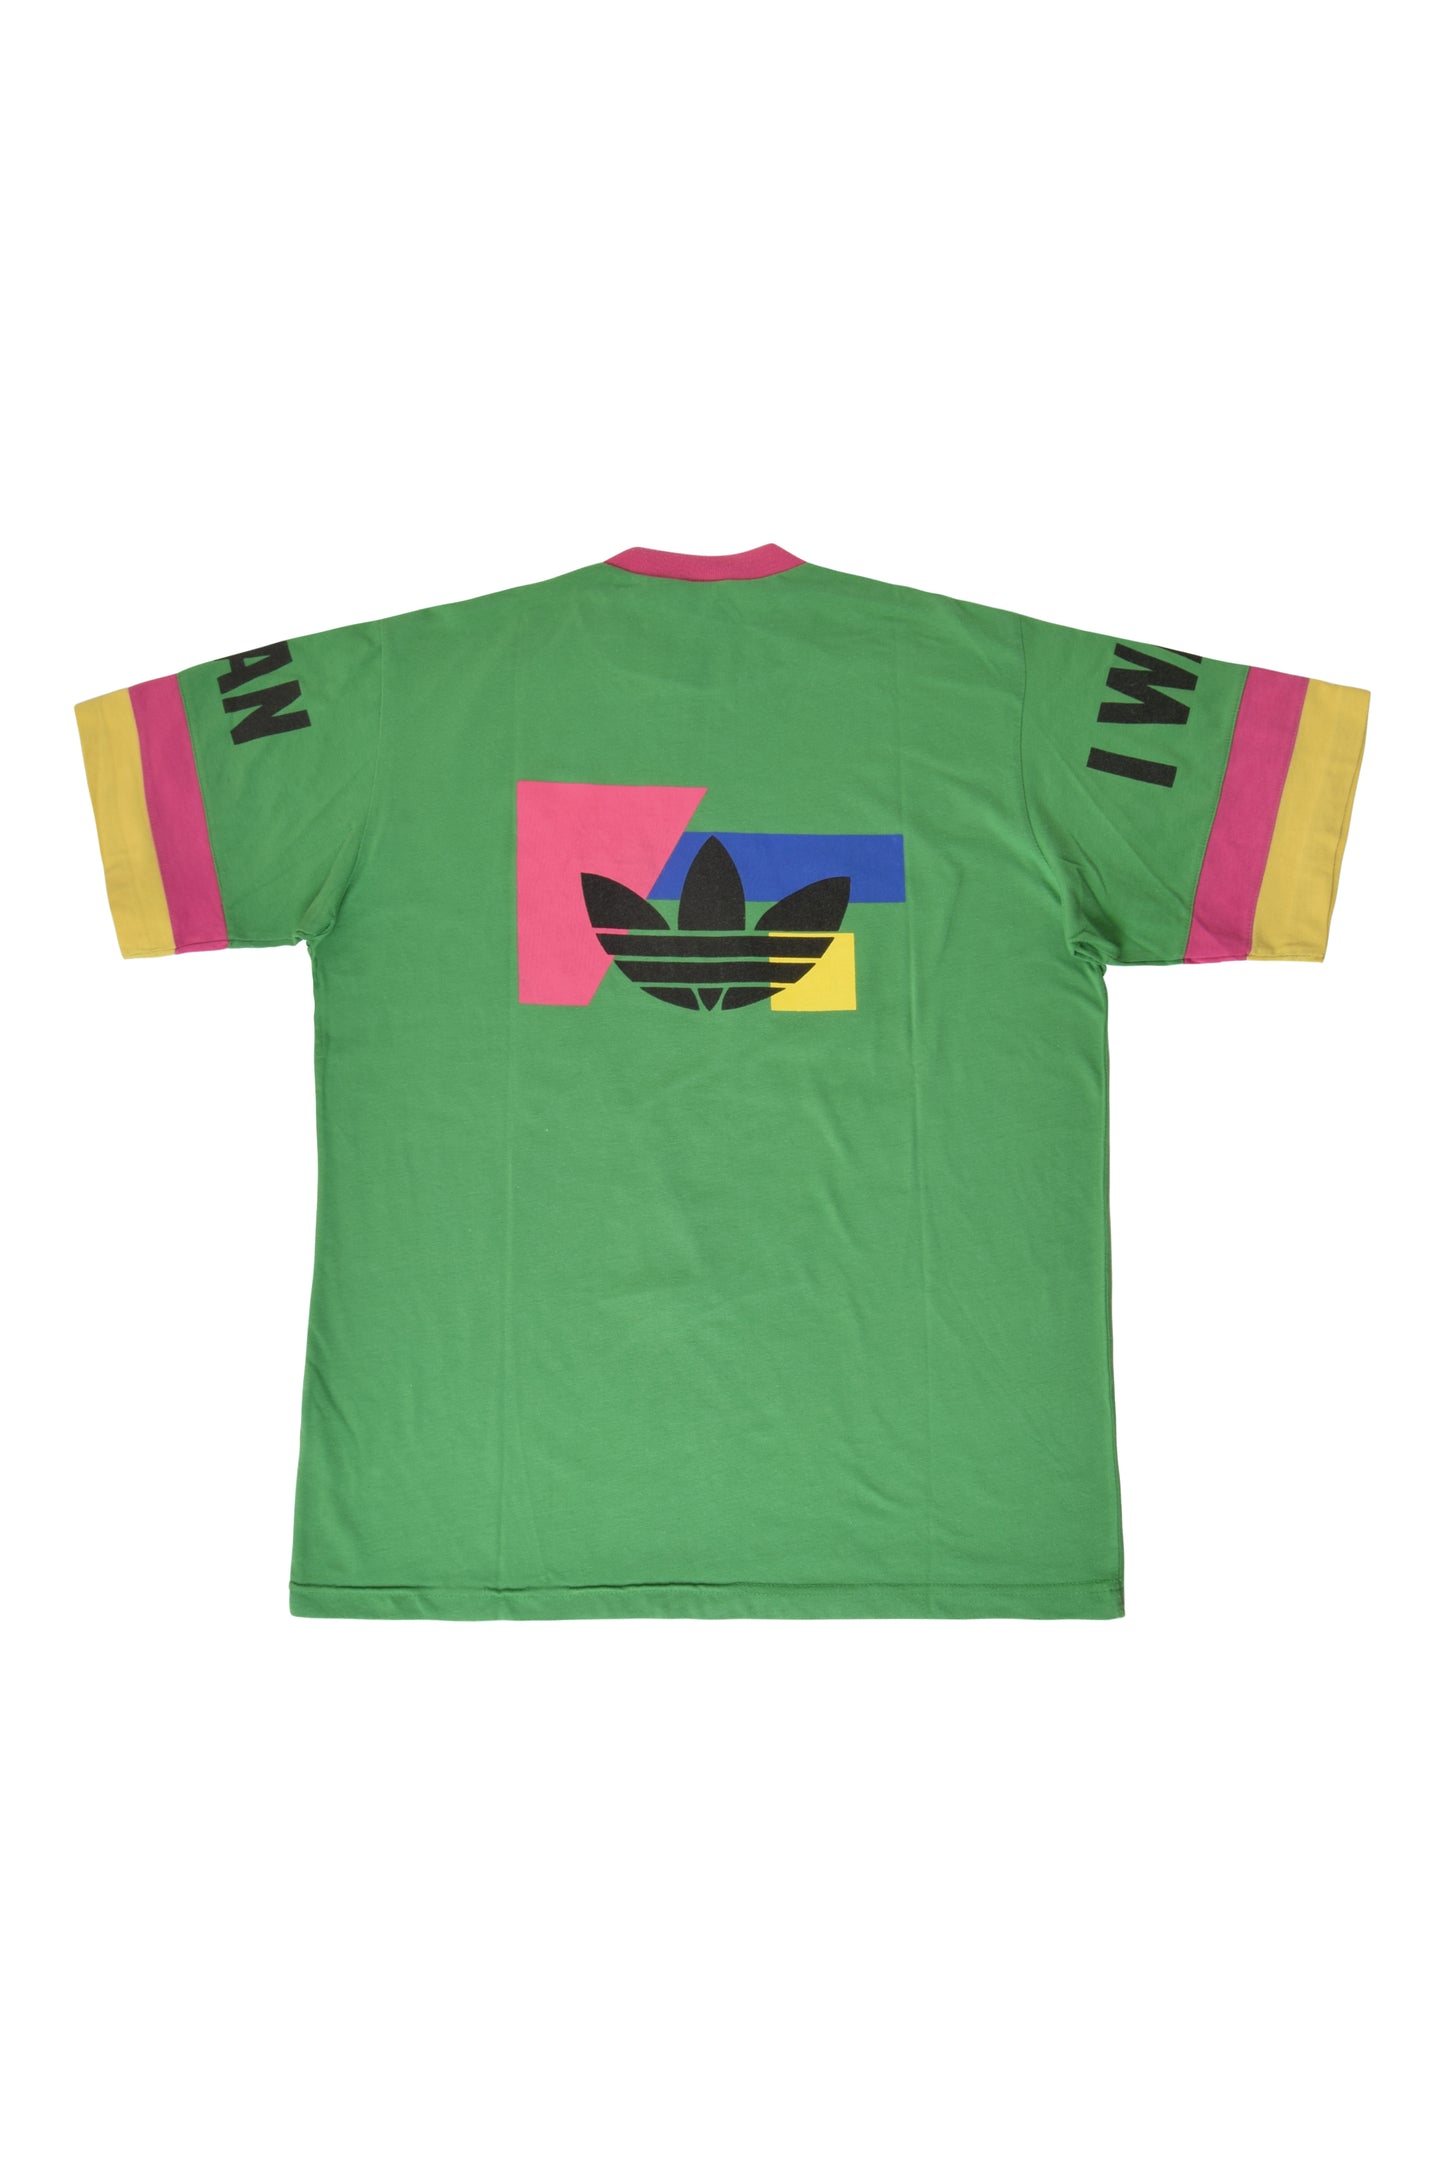 Vintage Adidas 90's T-Shirt I Can I Want Size S-M Green